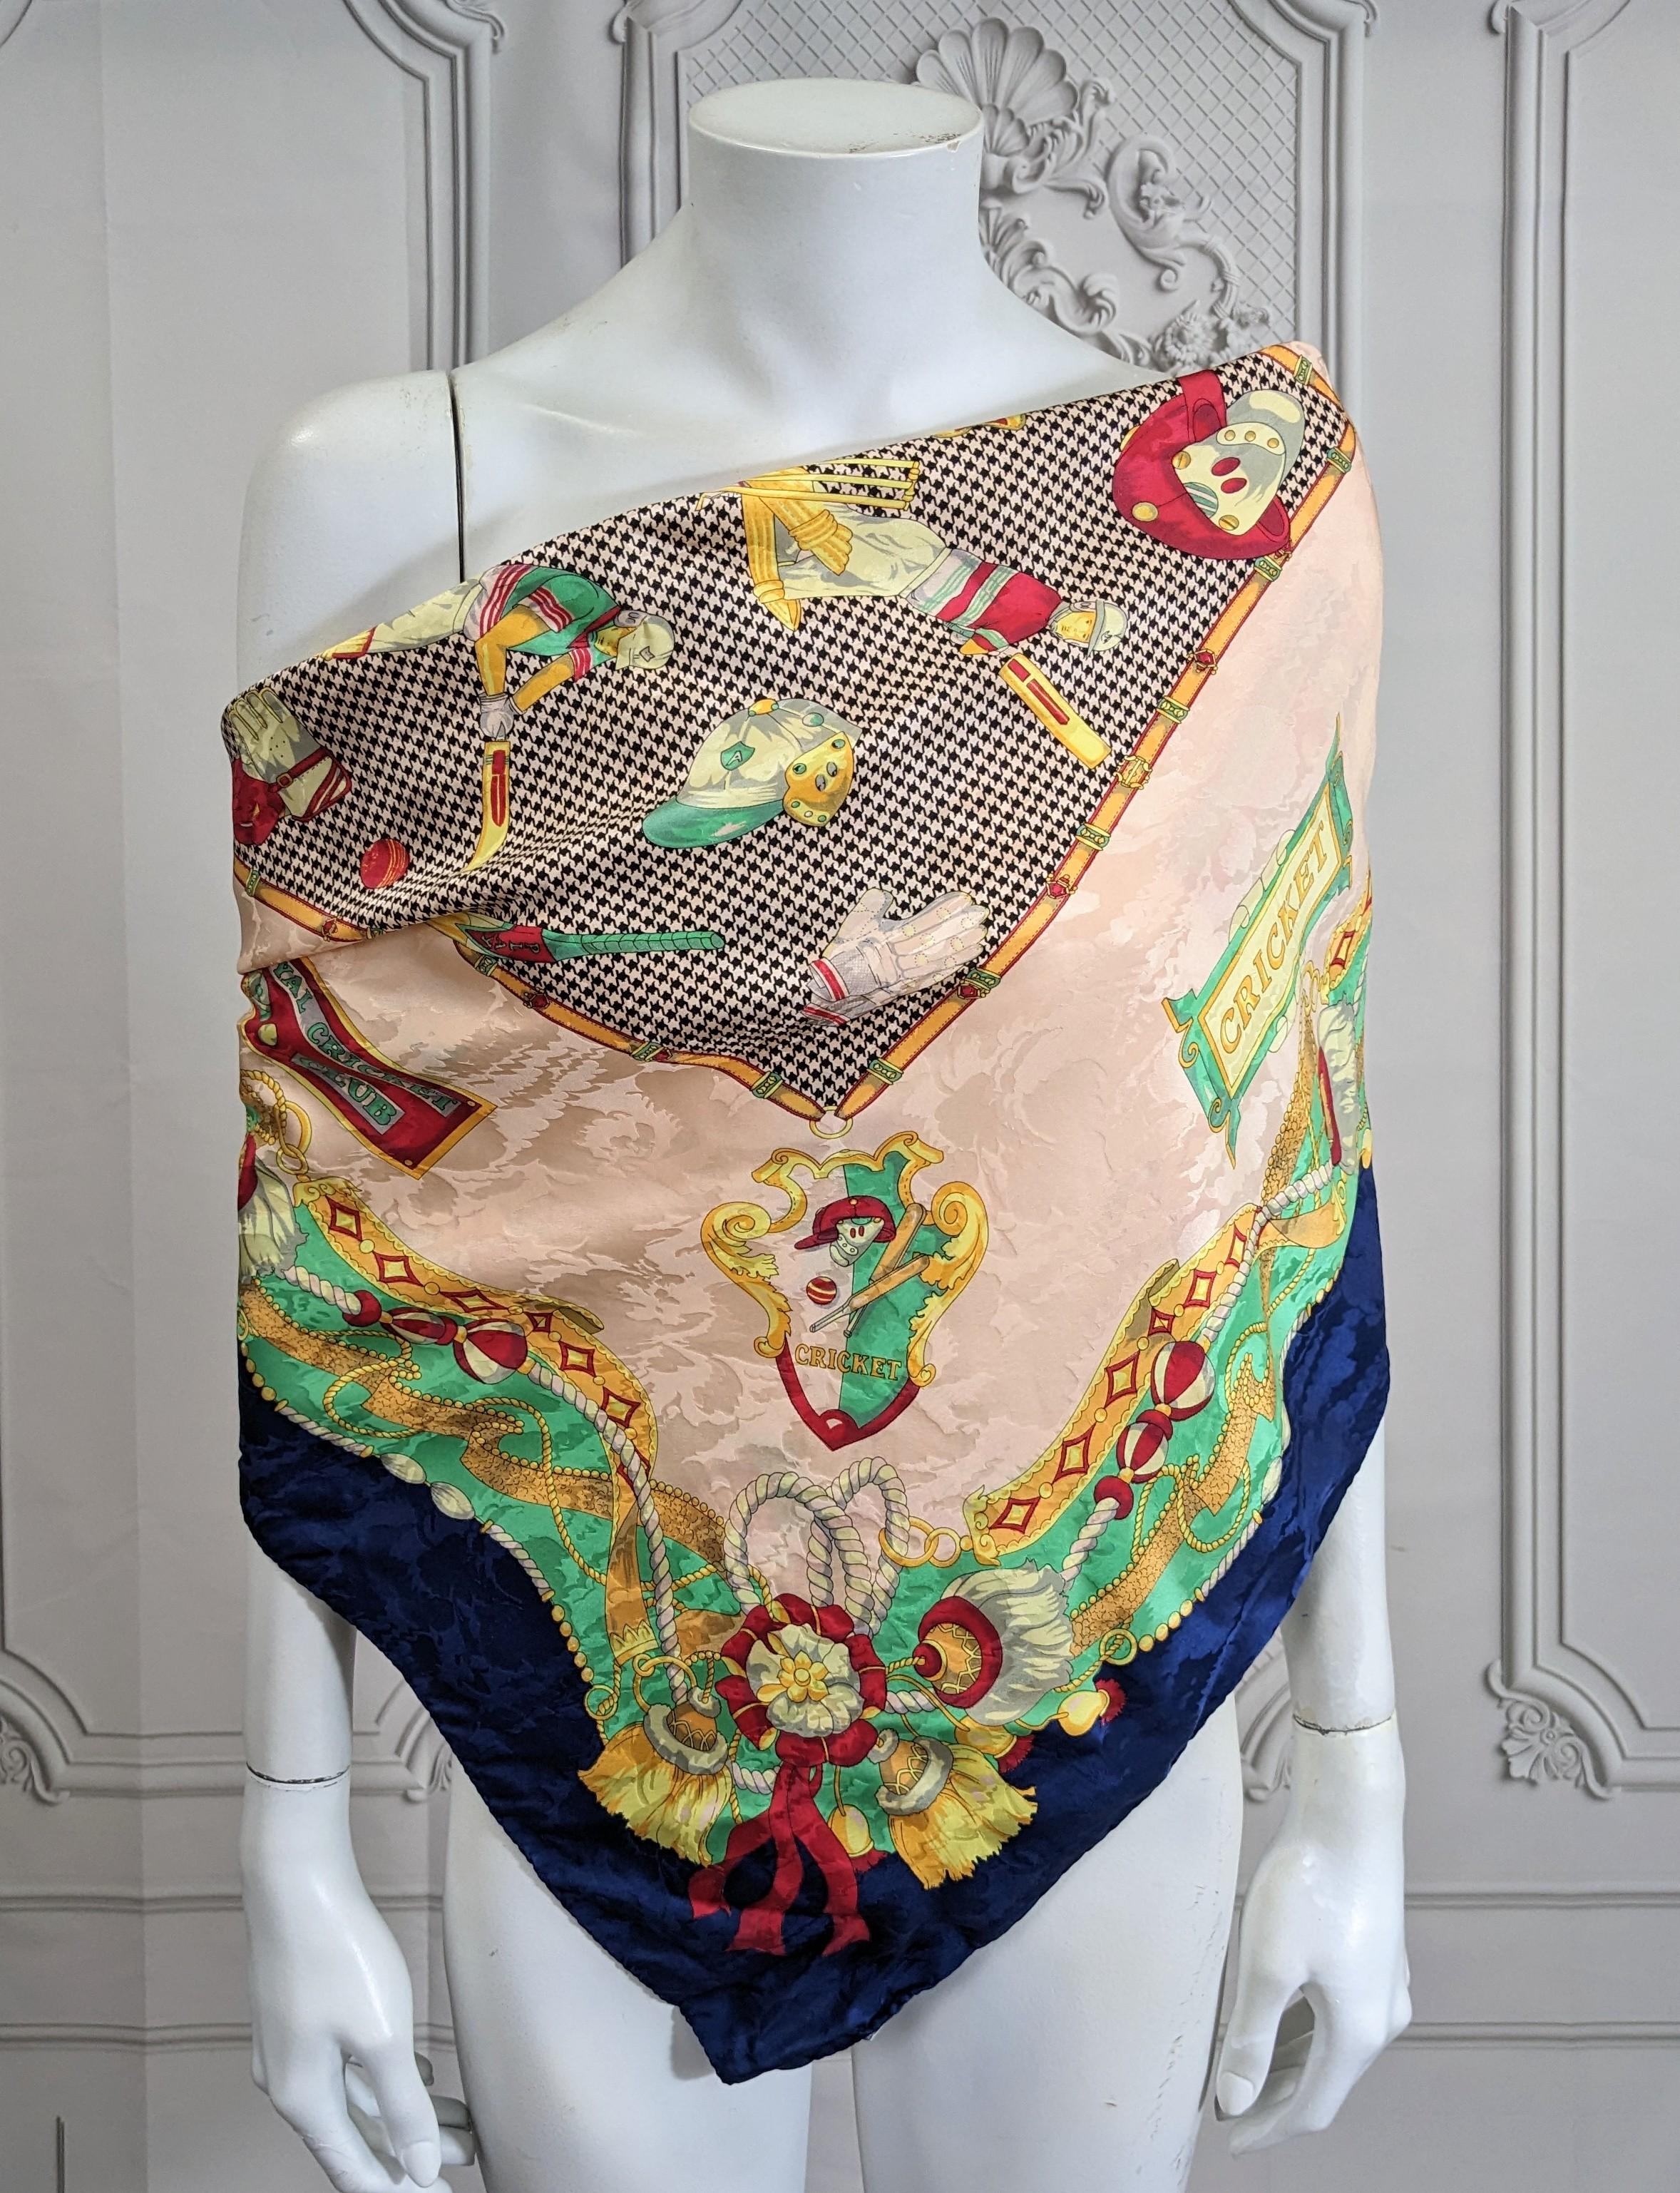 Balestra Silk Crepe Scarf, Cricket Theme In Good Condition For Sale In New York, NY